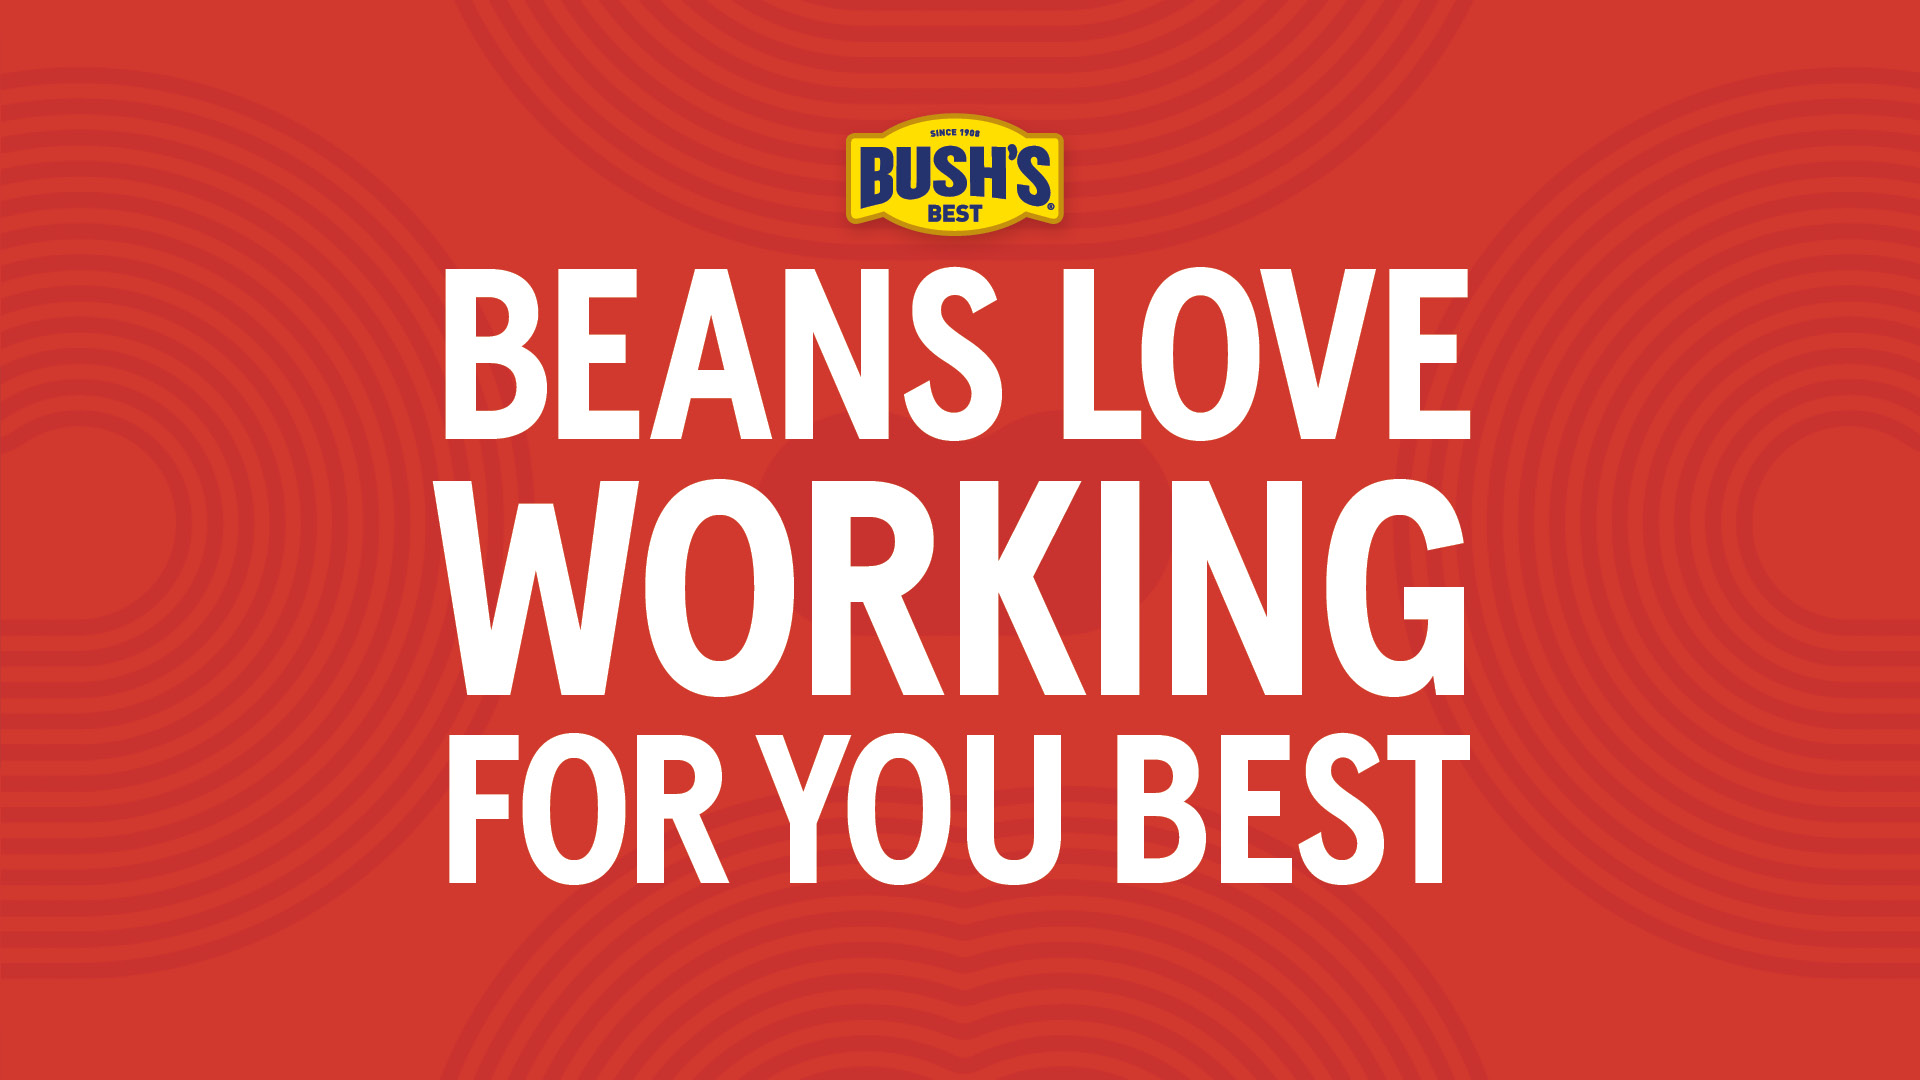 Beans love working for you best. White text on a red graphic background.